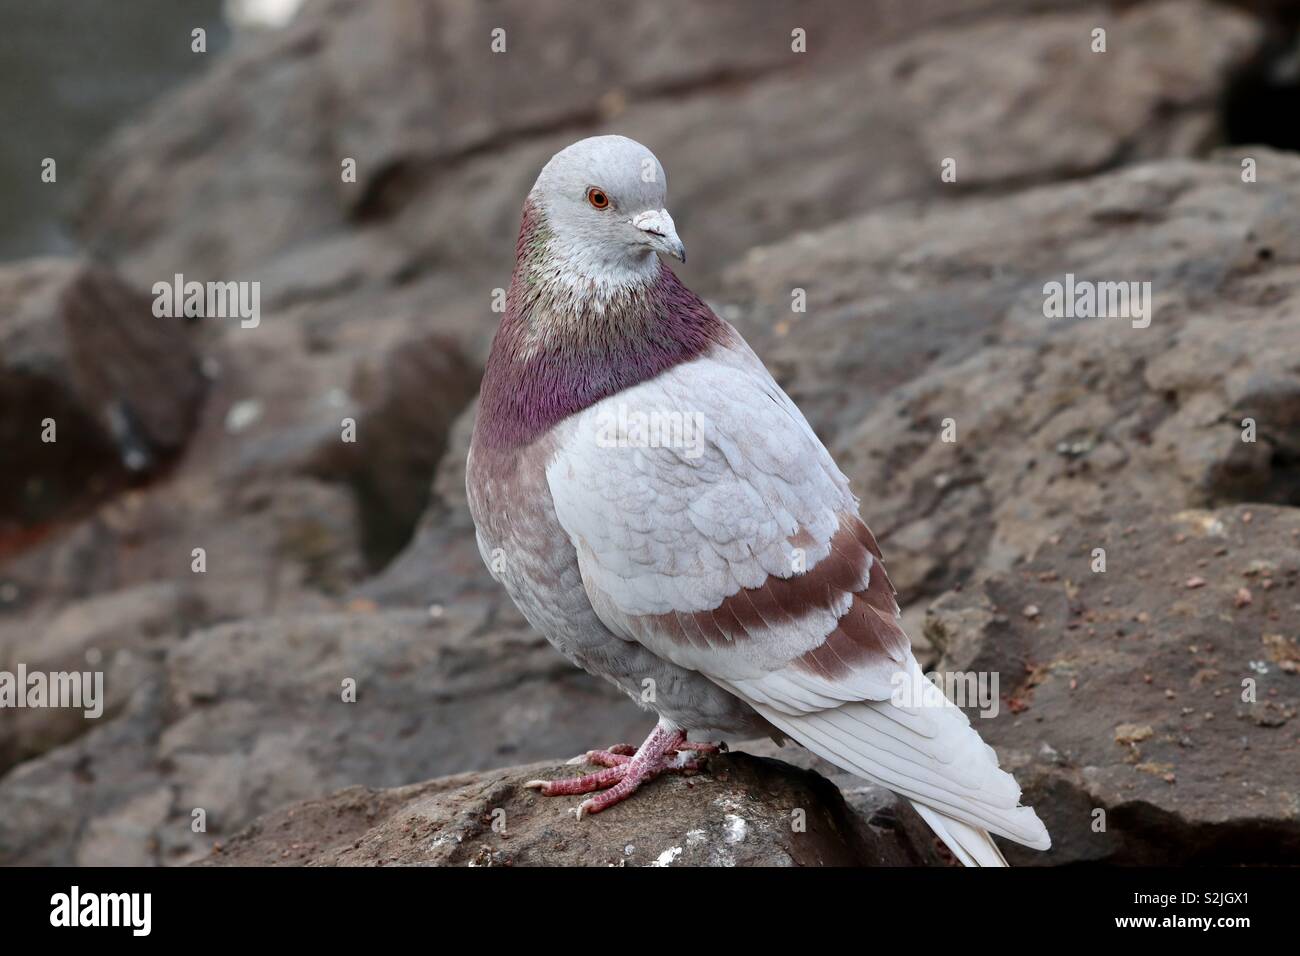 Solo pigeon standing on rocks Stock Photo